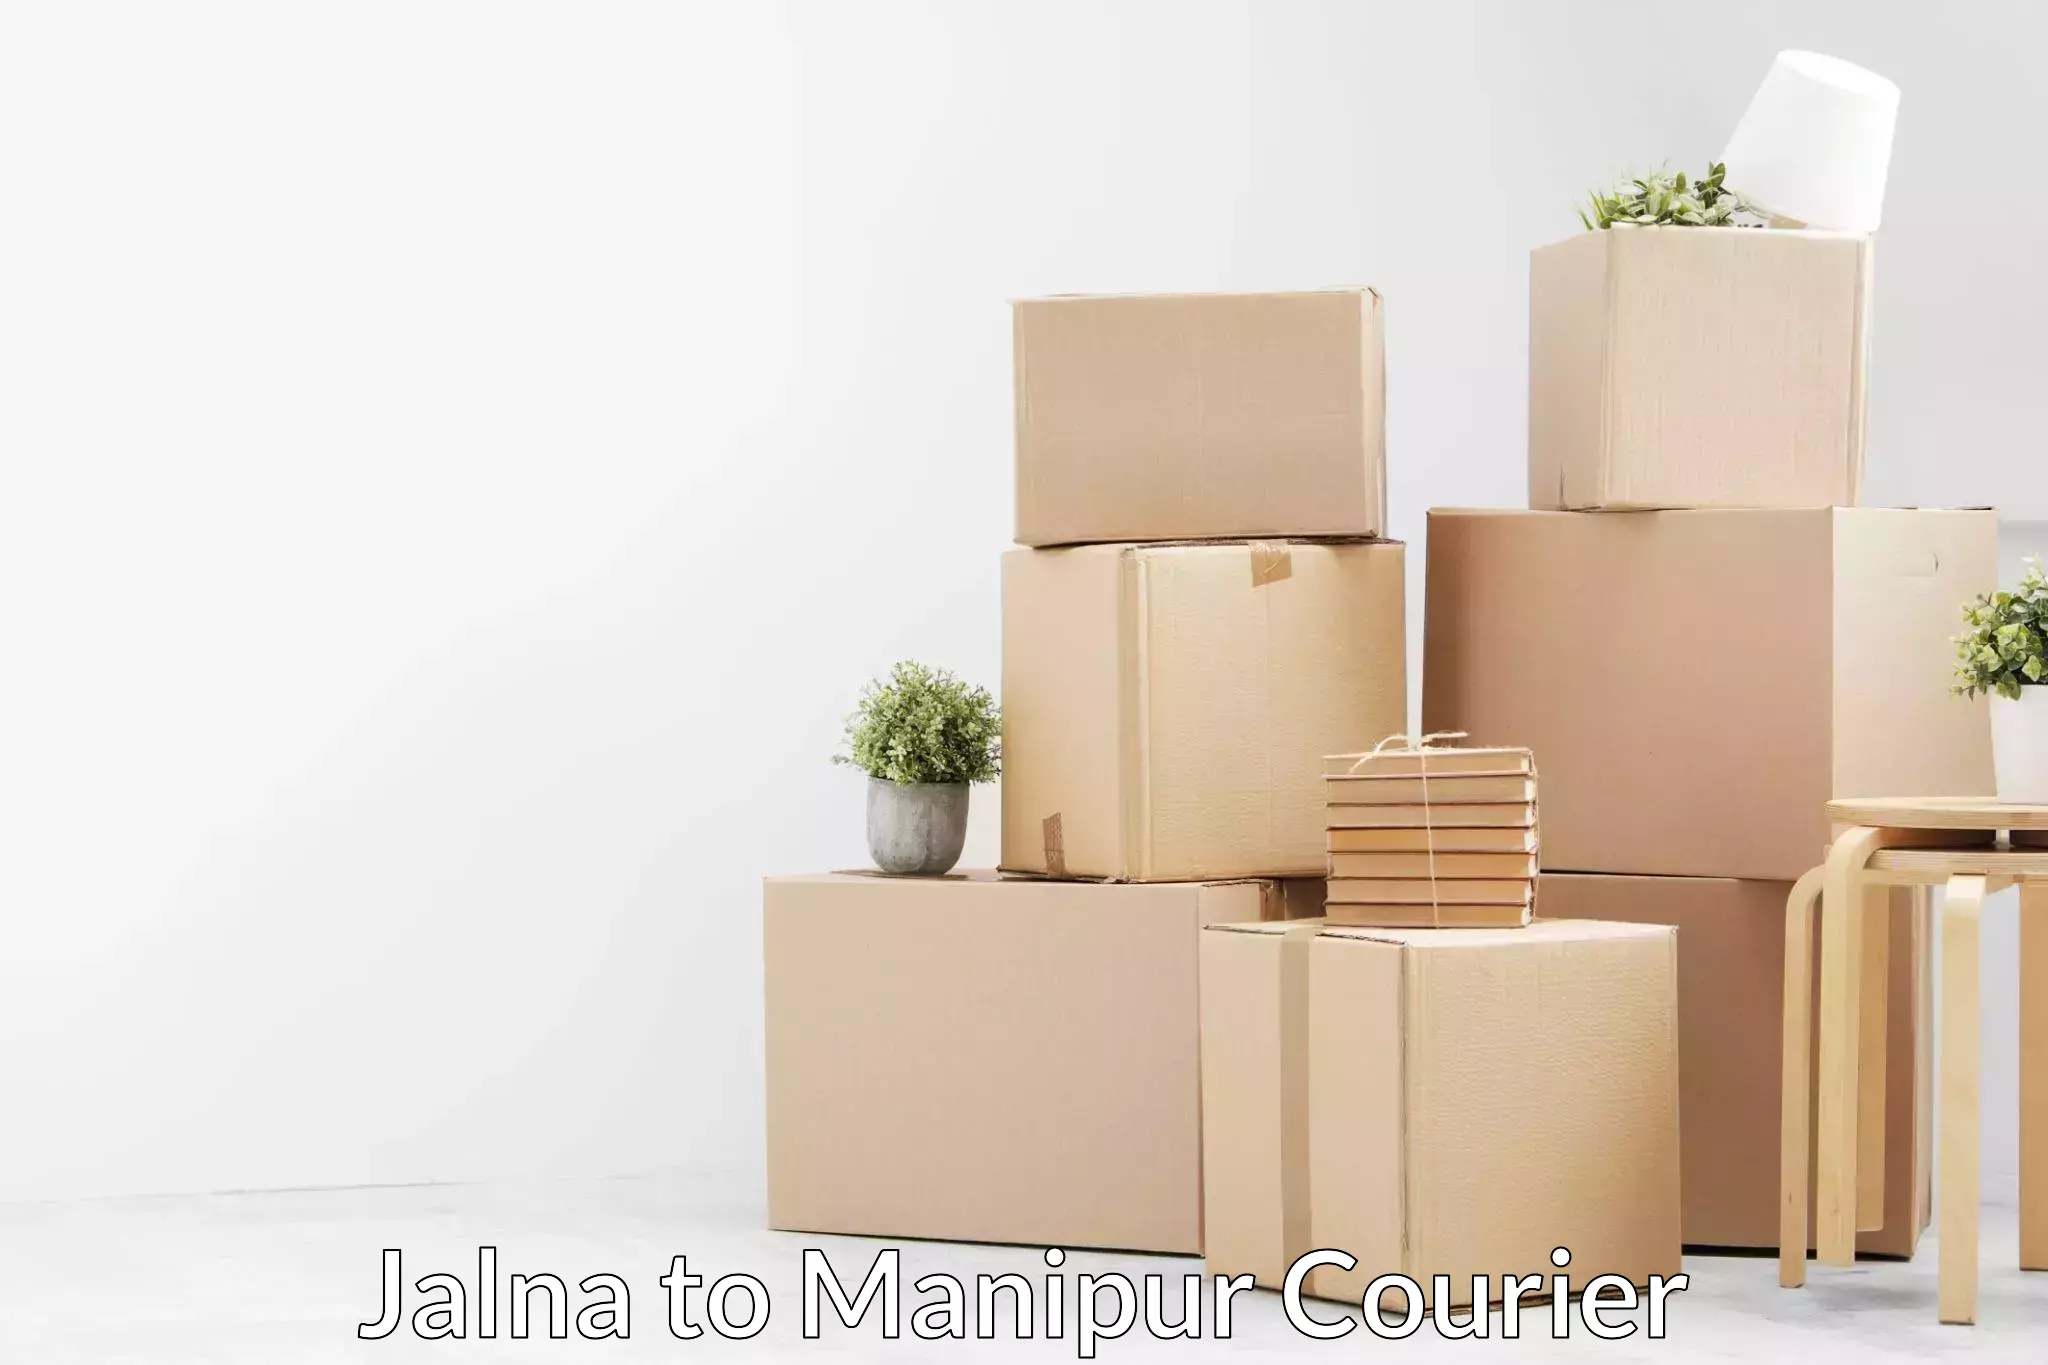 Furniture delivery service Jalna to Manipur